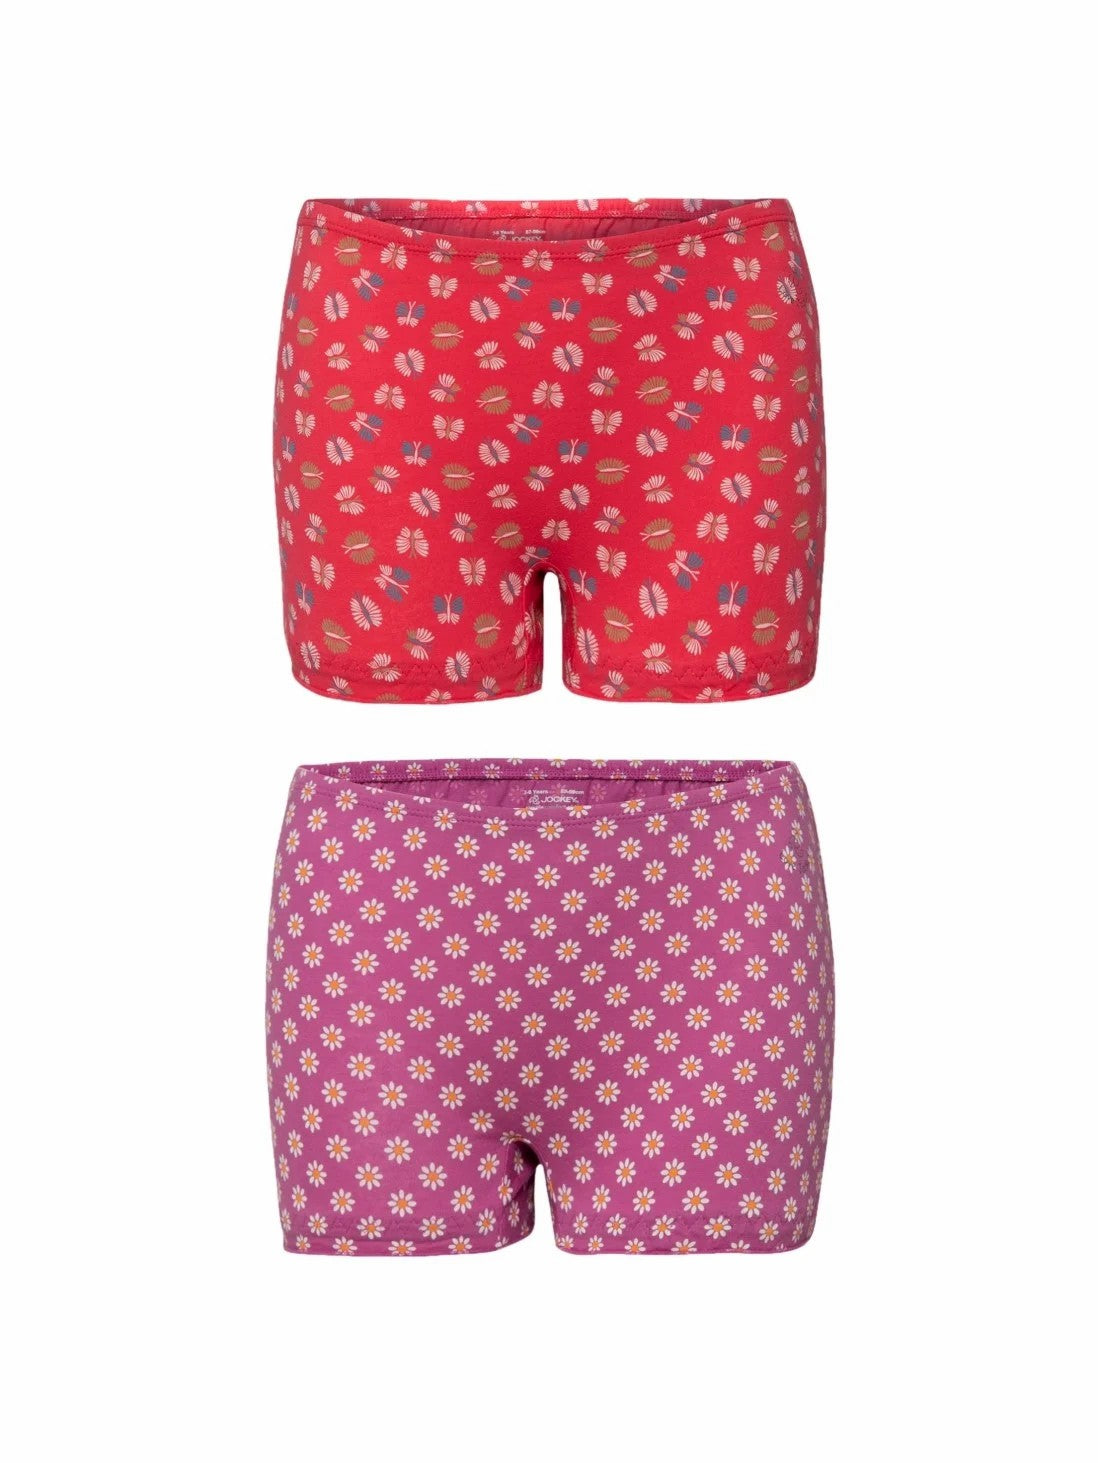 Girls Assorted Prints Bloomers Pack of 2